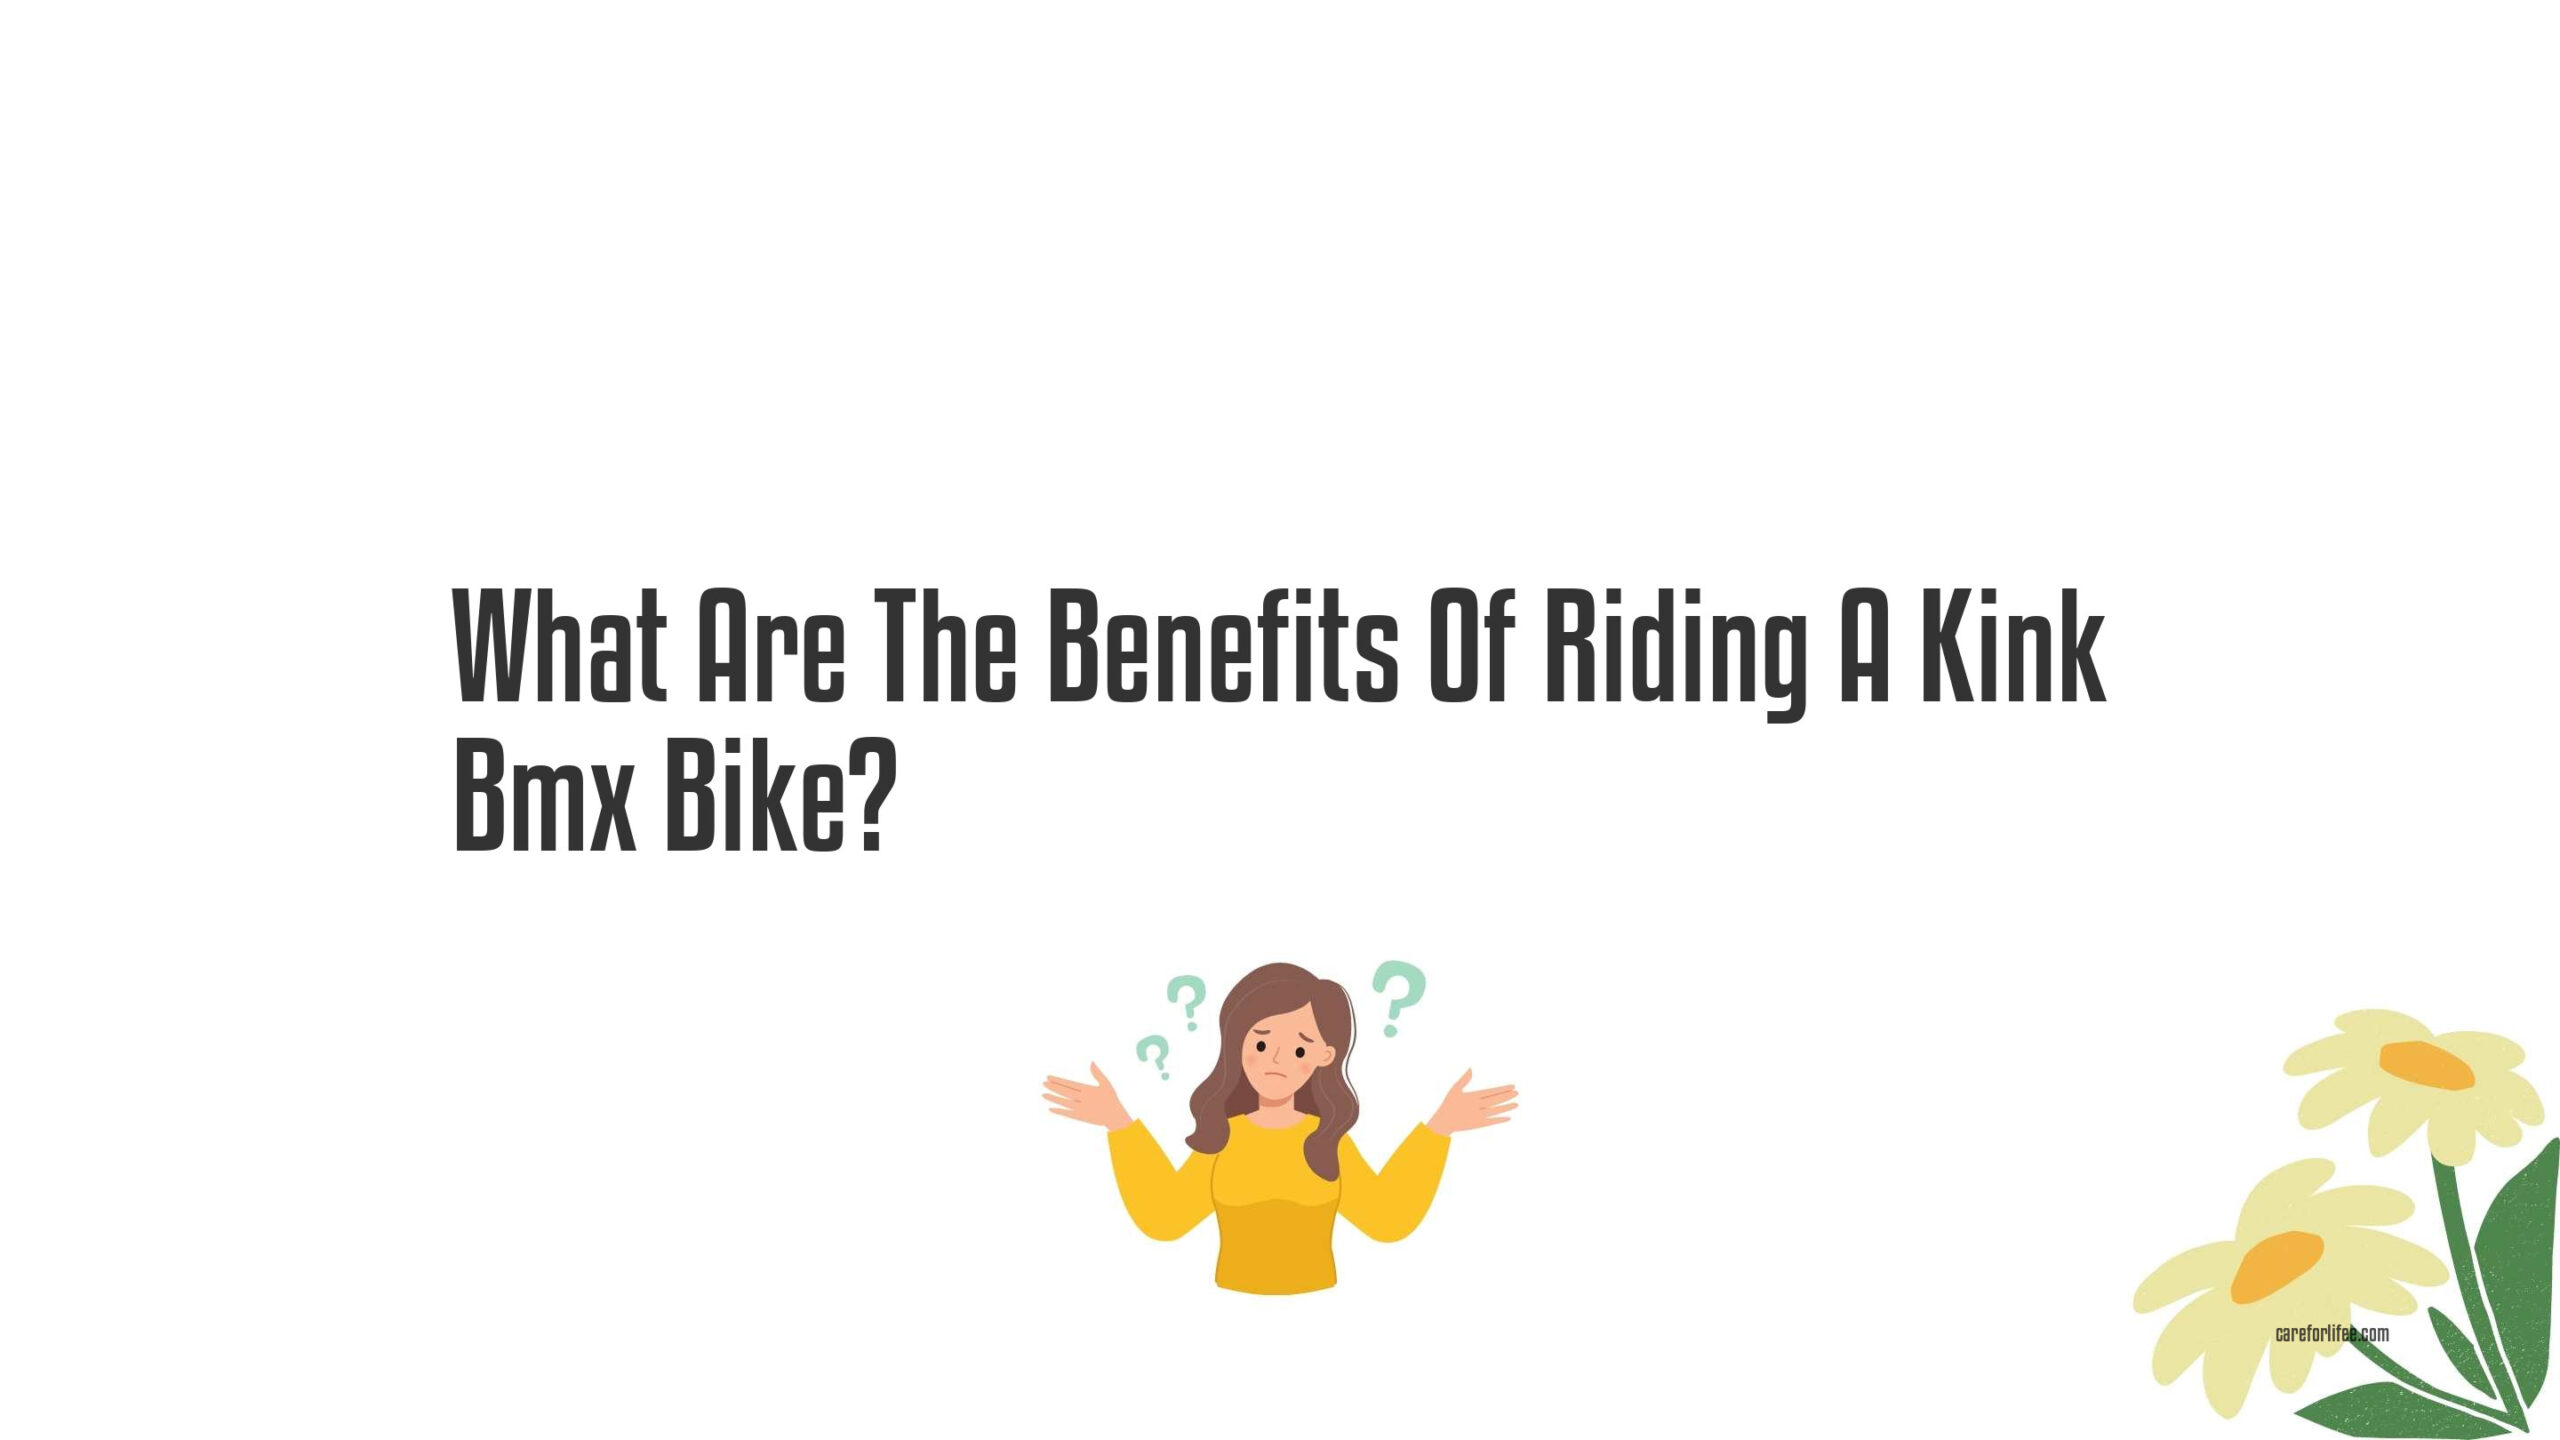 What Are The Benefits Of Riding A Kink Bmx Bike?